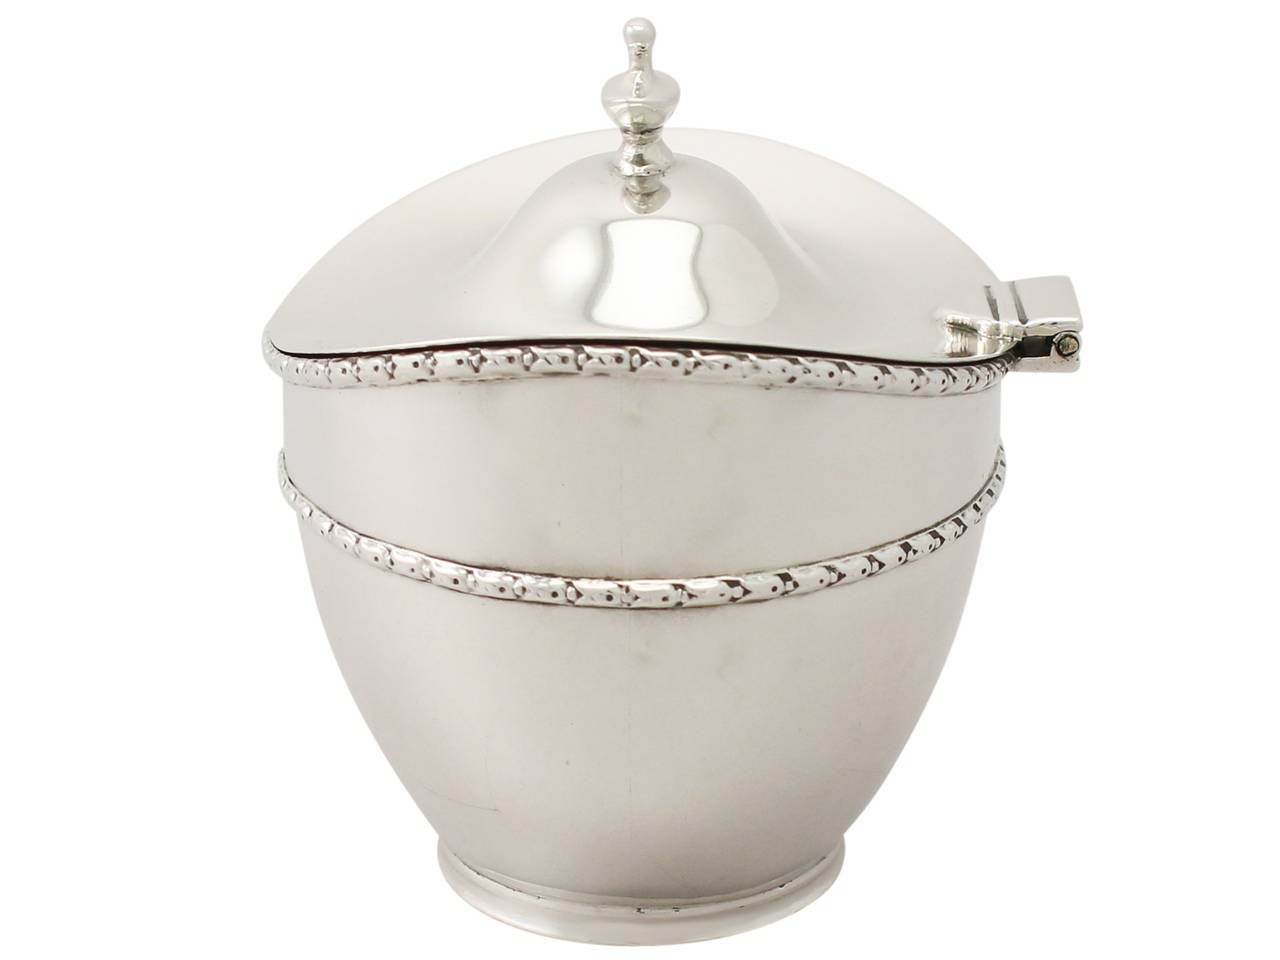 A fine and impressive antique George V English sterling silver tea caddy; part of our silver teaware collection

This impressive antique George V sterling silver tea caddy has a plain oval form onto a collet foot.


The surface of the caddy is plain